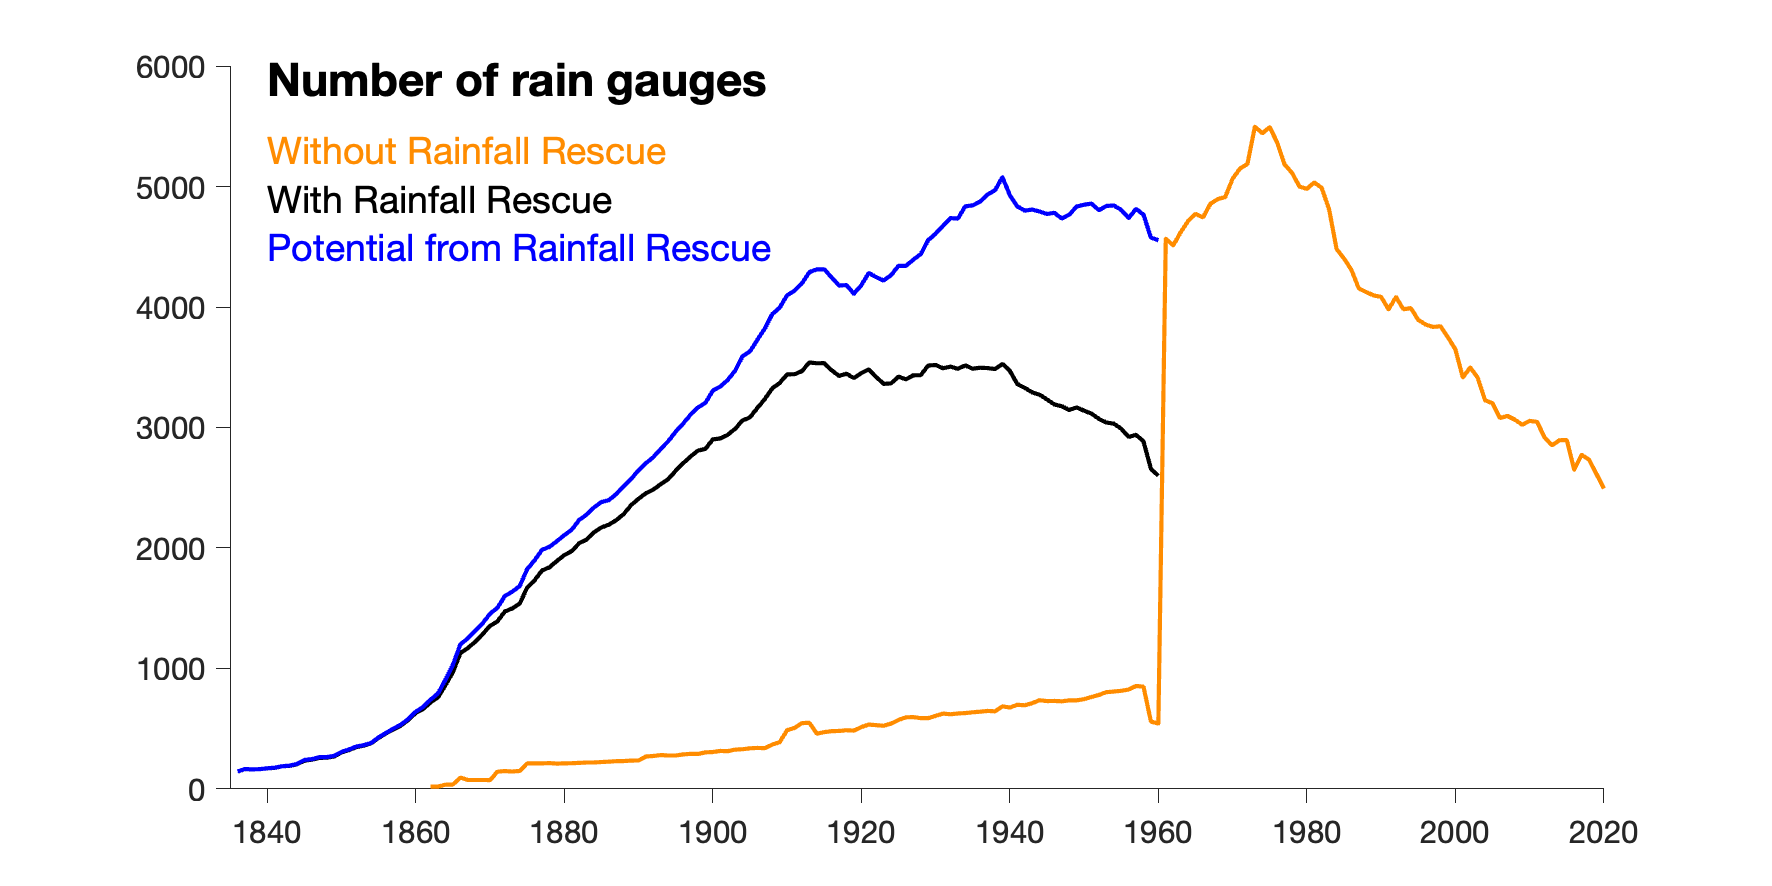 Line graph showing how the number of rain gauges contributing data to the Met Office's national rain series has dramatically increased pre-1960 thanks to the Rainfall Rescue volunteers